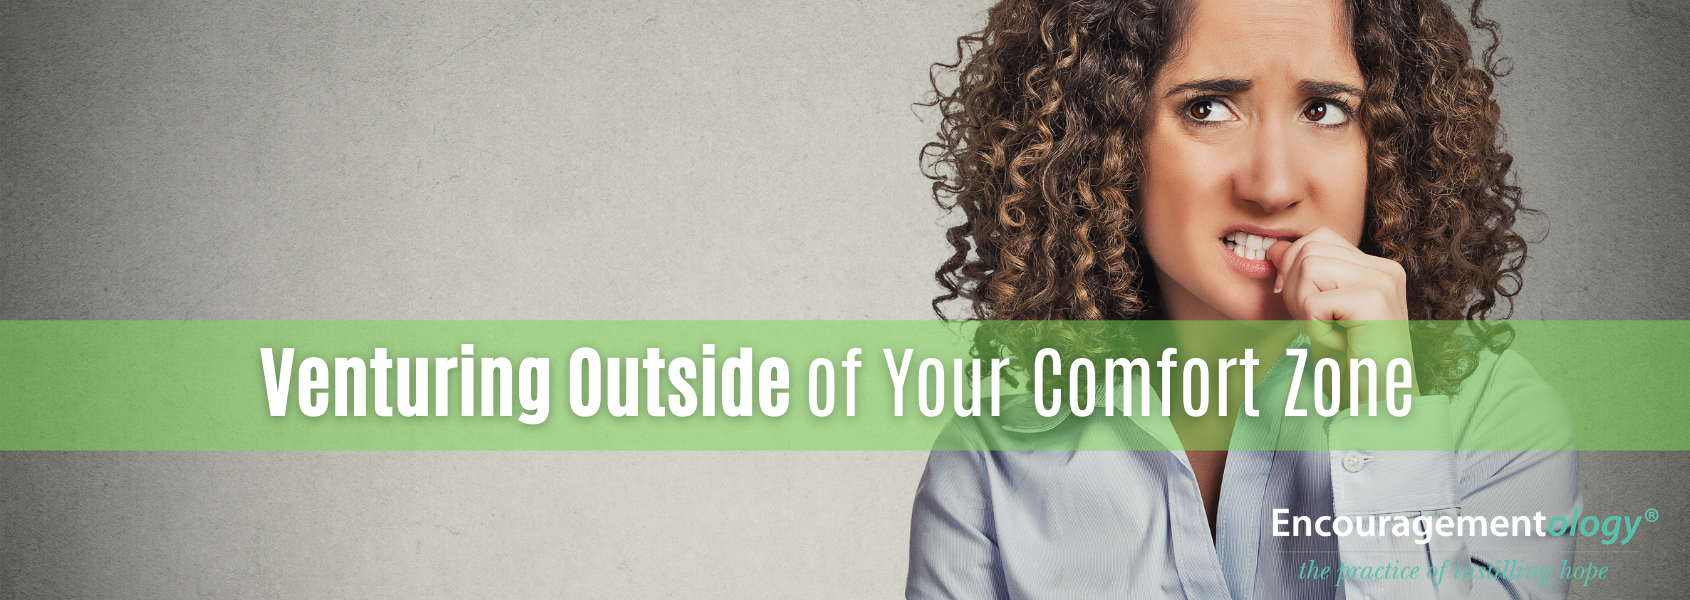 Venturing Outside of Your Comfort Zone